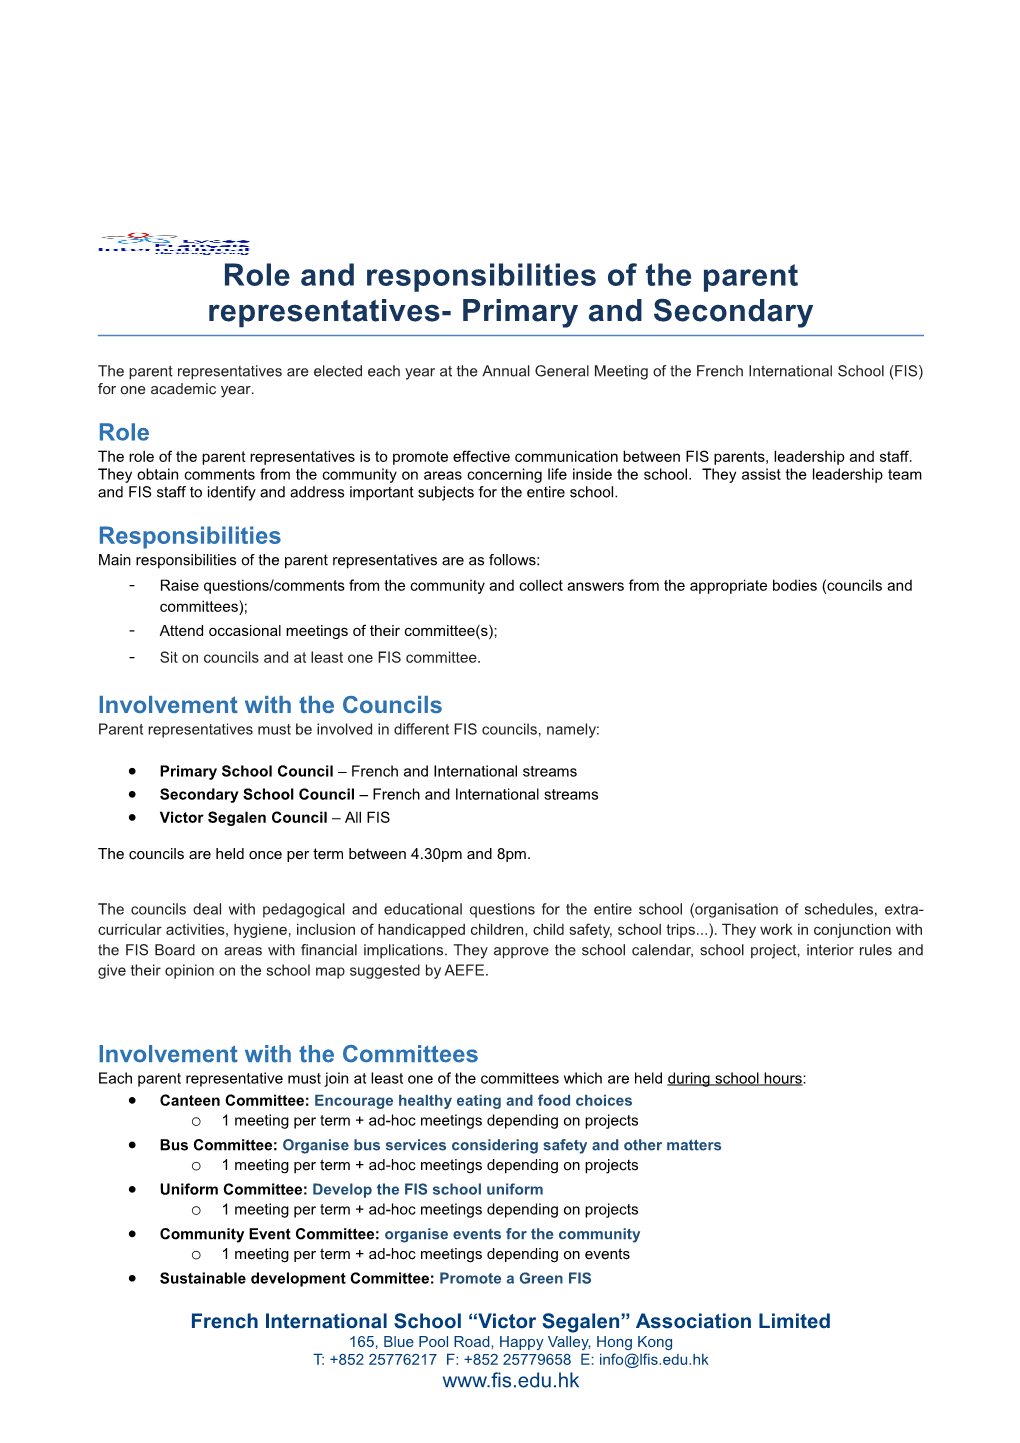 Role and Responsibilities of the Parent Representatives- Primary and Secondary